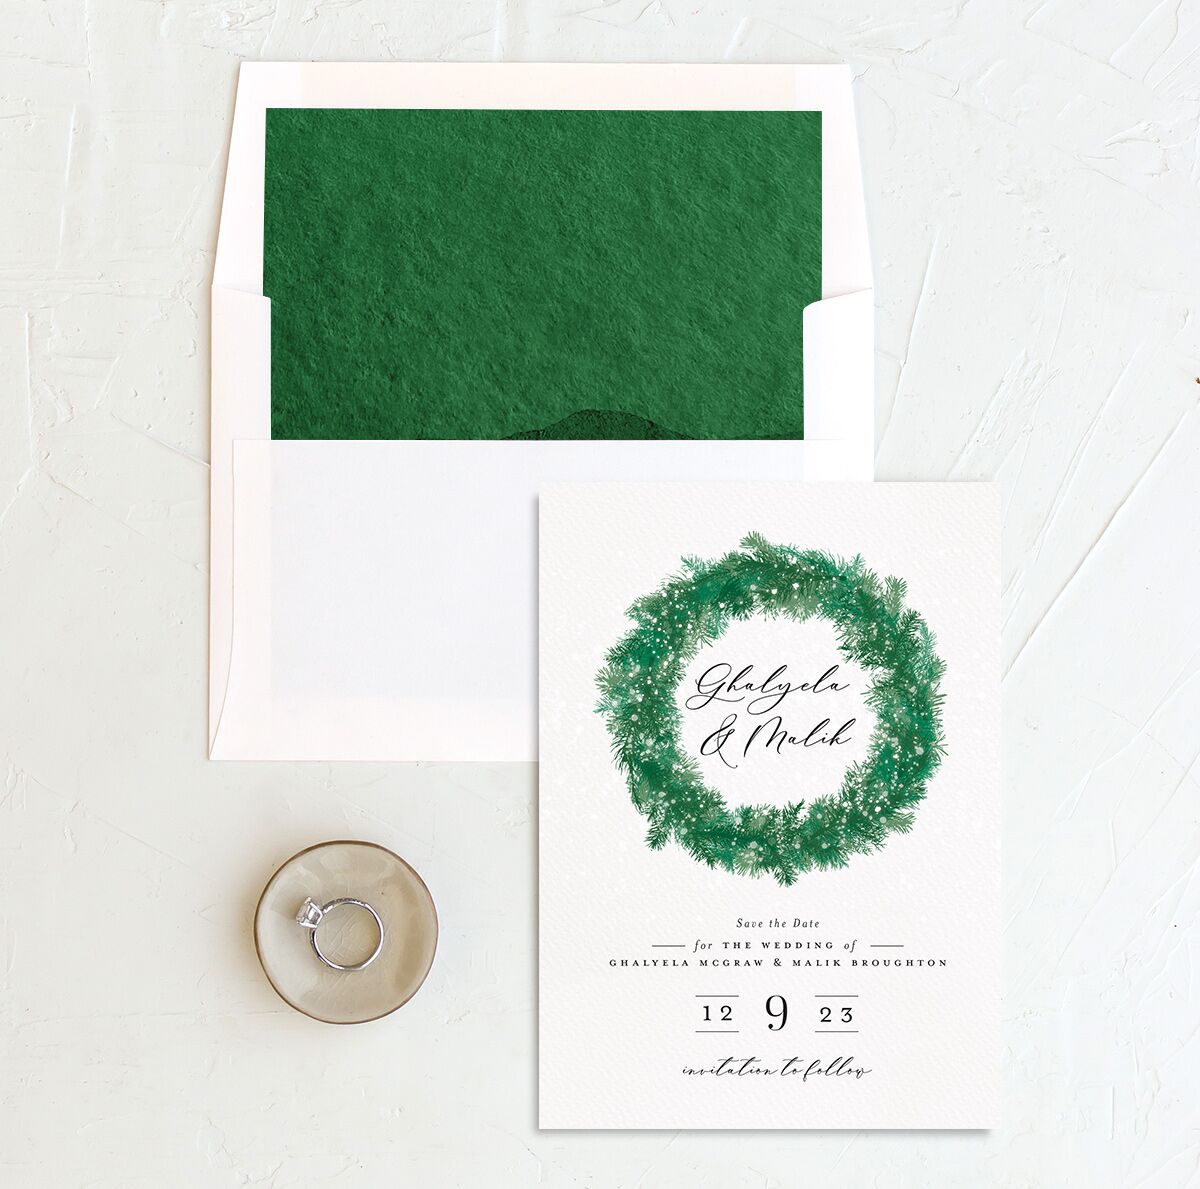 Snowy Wreath Save The Date Cards envelope-and-liner in green